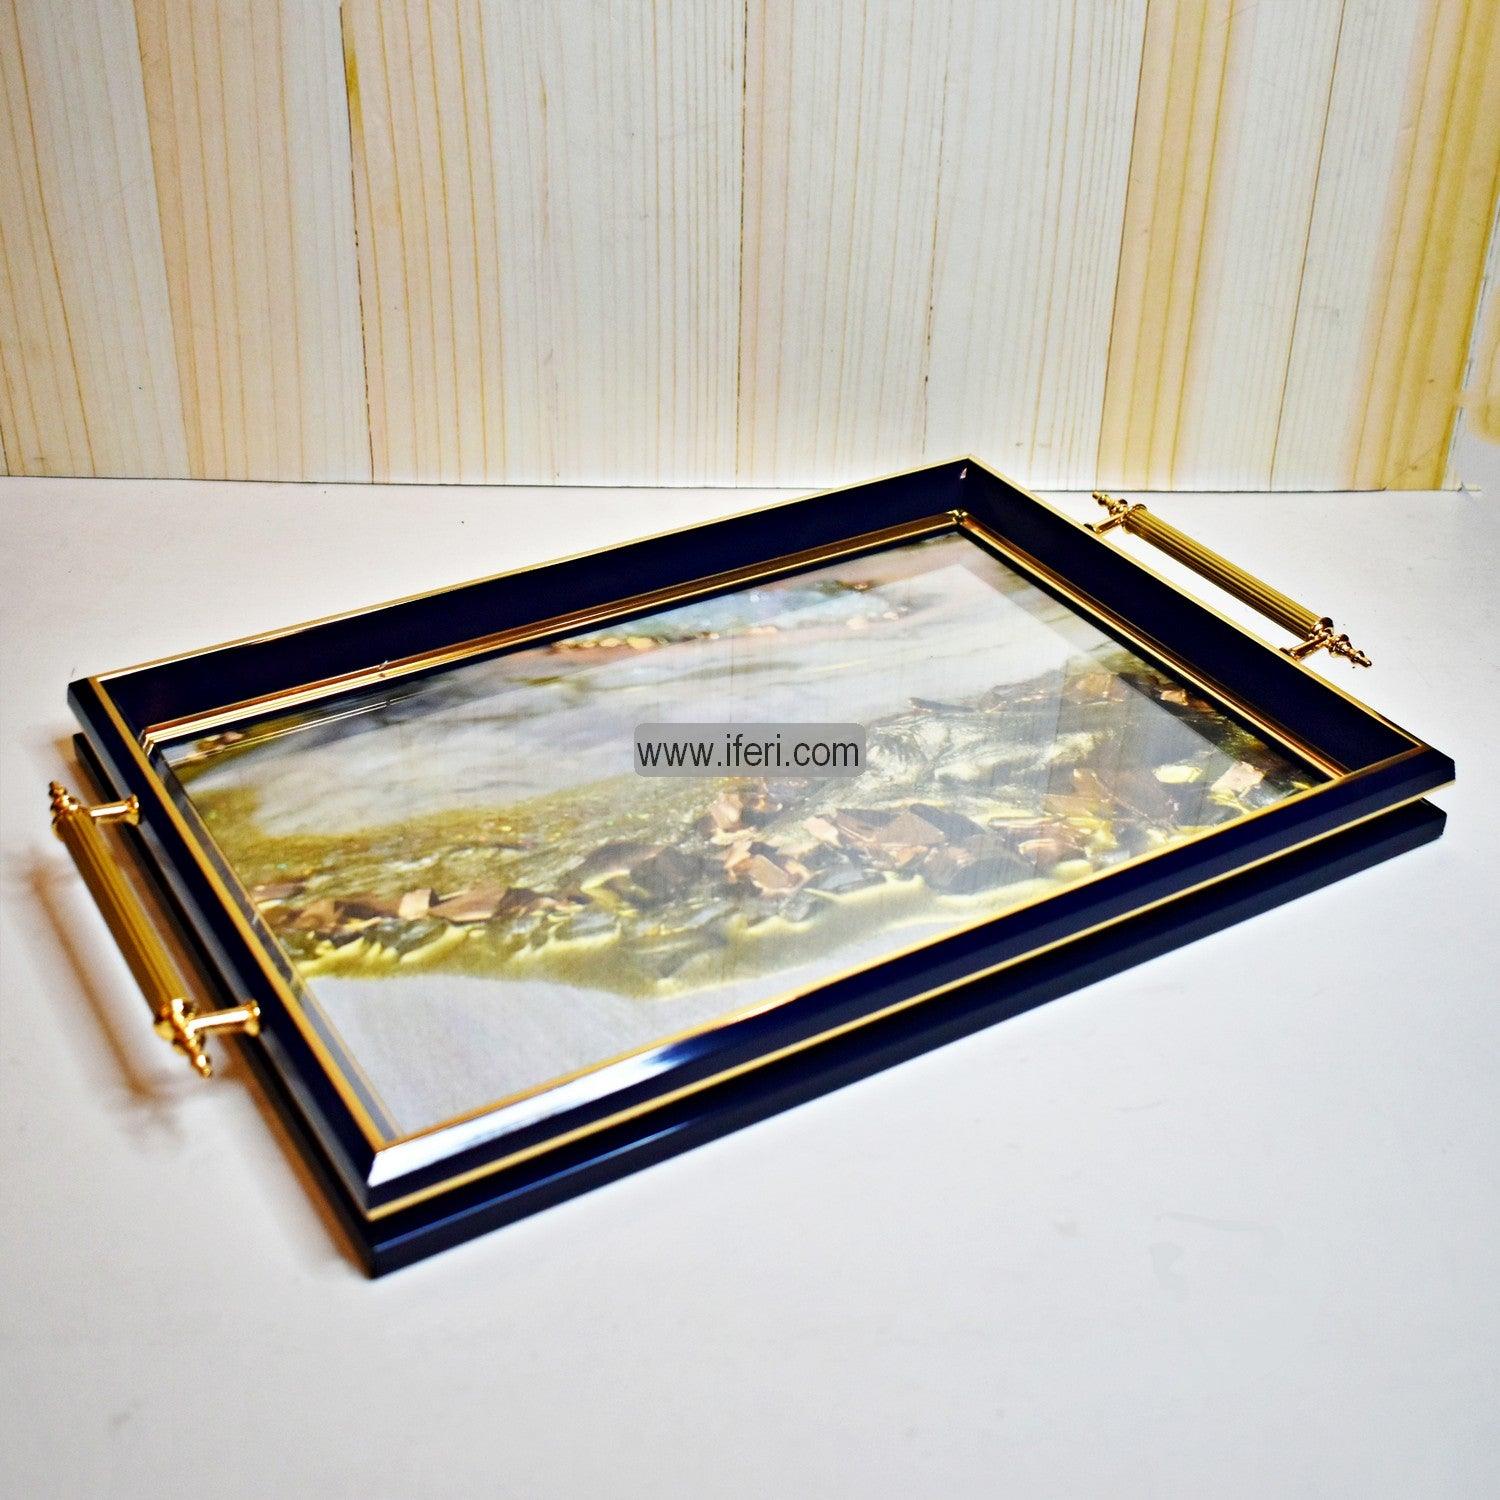 17 Inch Fiber Exclusive Turkish Serving Tray 